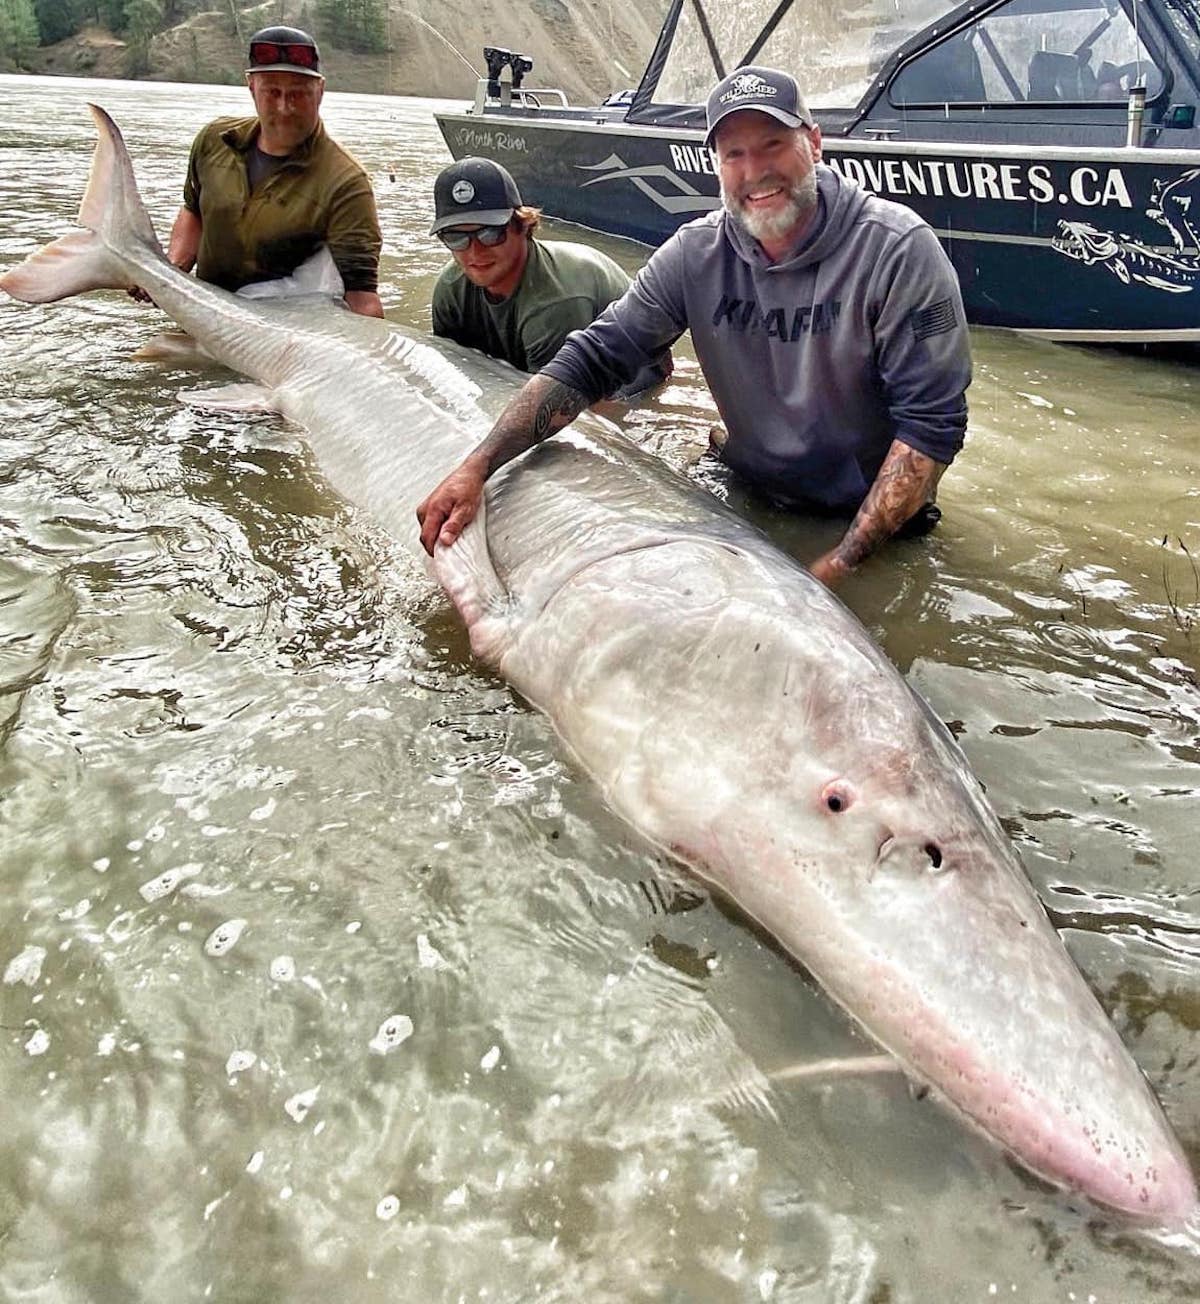 Steve Ecklund caught a massive sturgeon in BC recently on a fishing trip